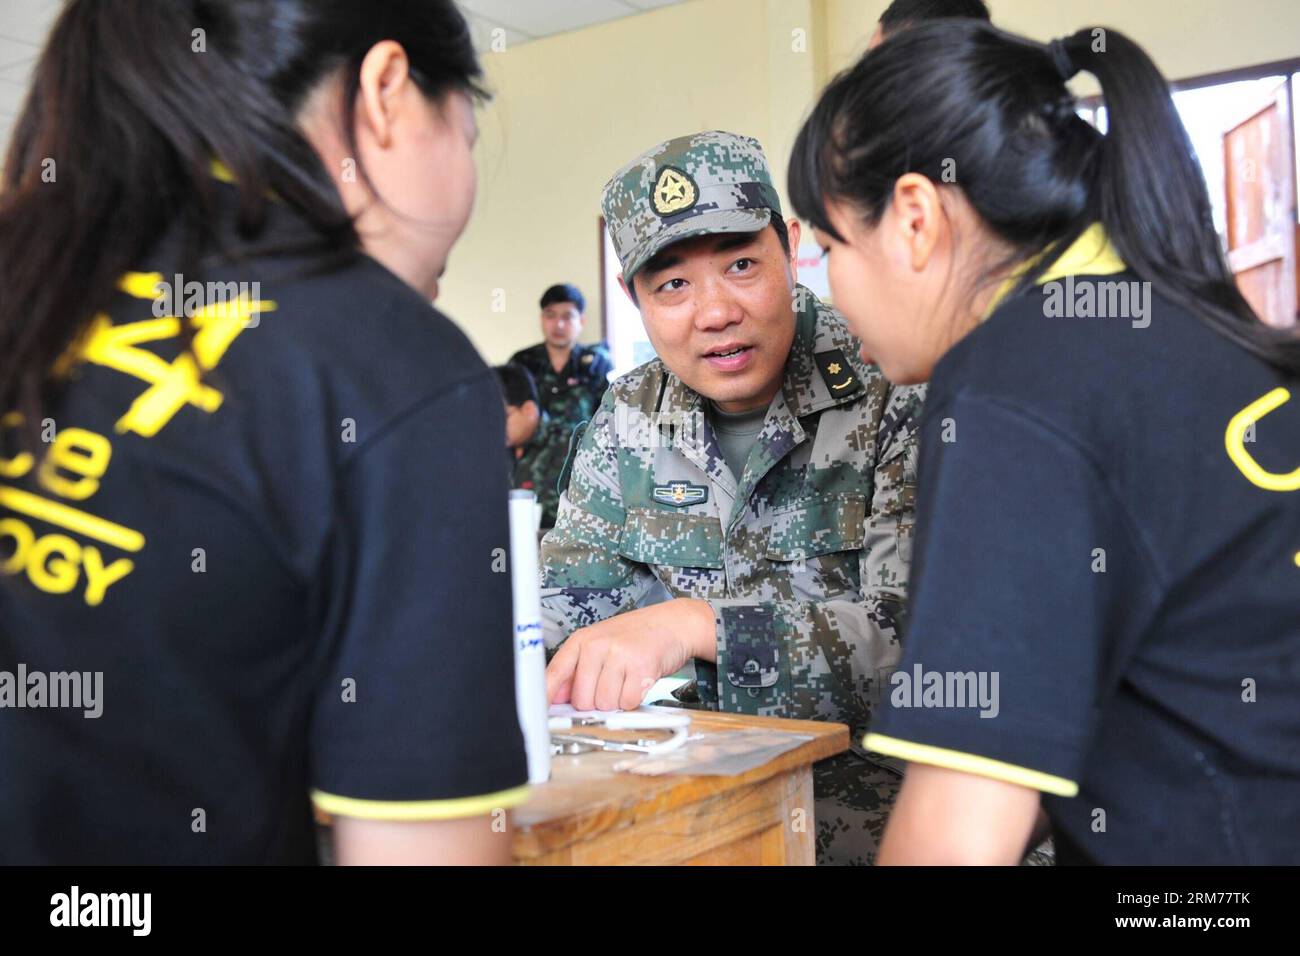 (140218) -- PITSANULOKE, Feb. 18, 2014 (Xinhua) -- A staff member of medical team from the Chinese military gives medical advice to locals at a school in Pitsanuloke Province, Thailand, Feb. 18, 2014. China has sent troops to attend the multilateral military exercise Cobra Gold, led by the United States and Thailand, for the first time. The seventeen-strong Chinese squad will take part in operations at the command and coordination center, engineering assistance, medical aid as well as discussions and exchanges of military medical sciences, according to officers with the foreign affairs office Stock Photo